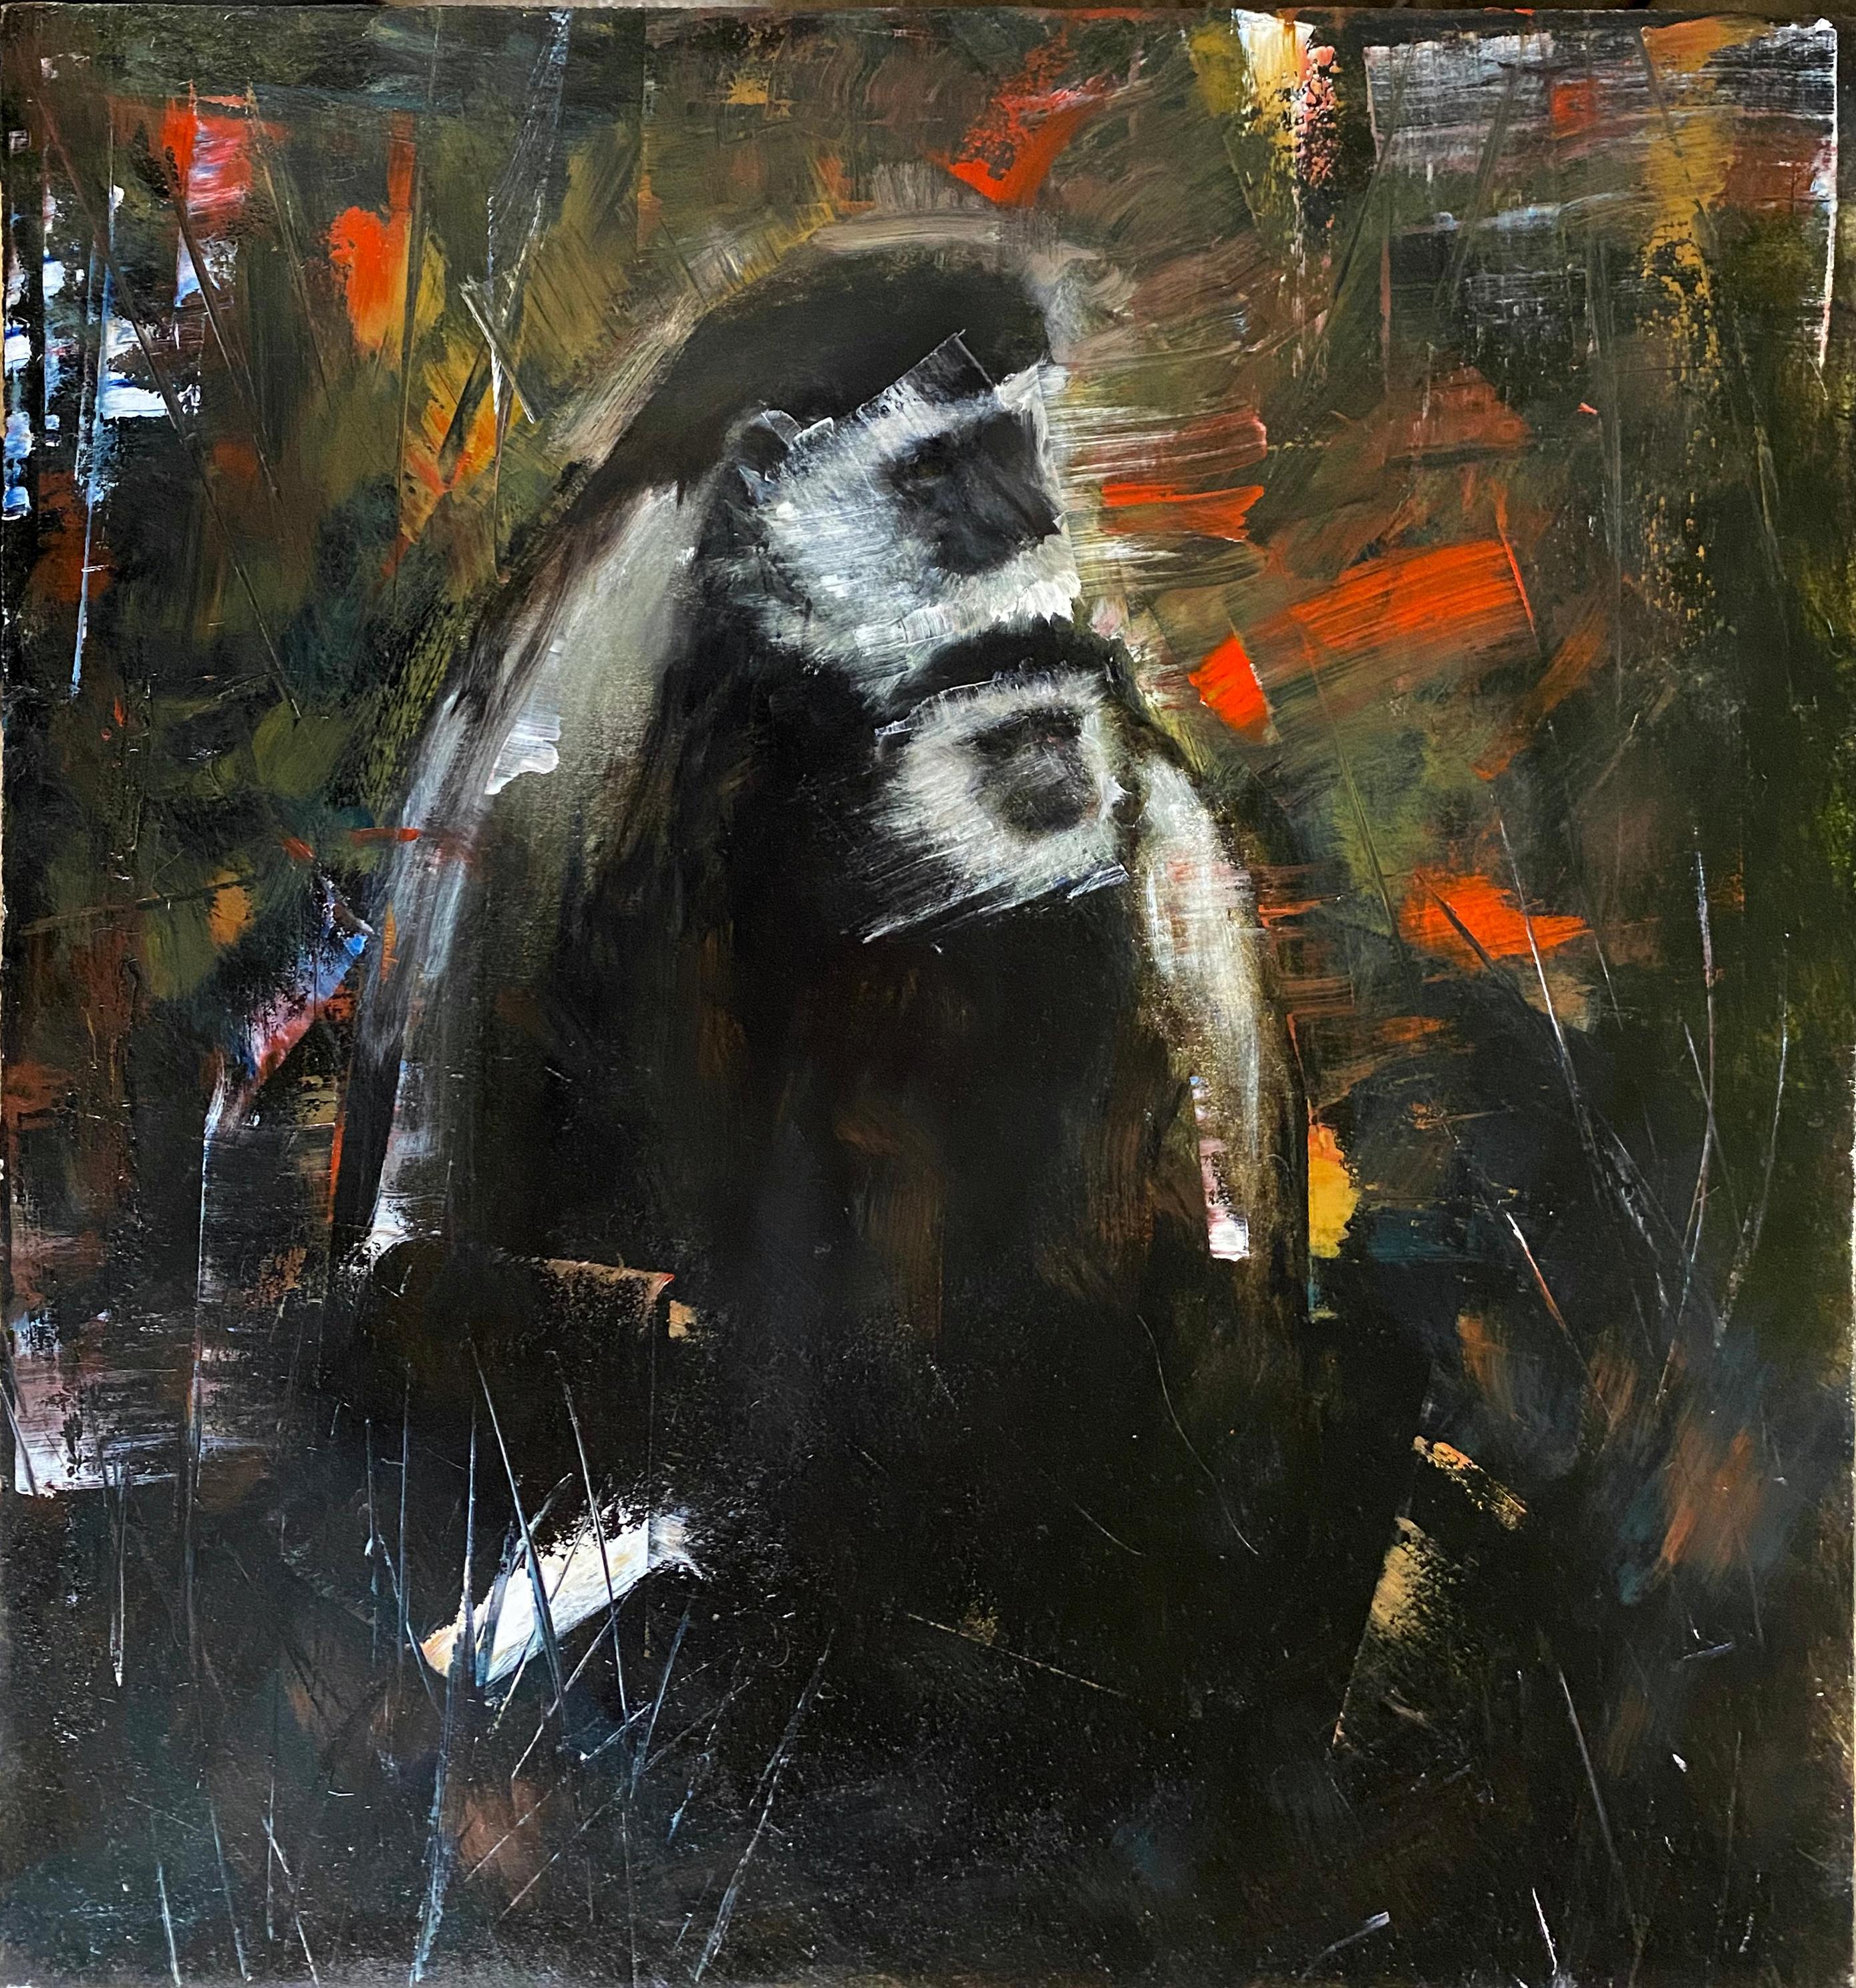 Primate Family, dark, abstracted monkeys, oil on panel w red, disrupted realism